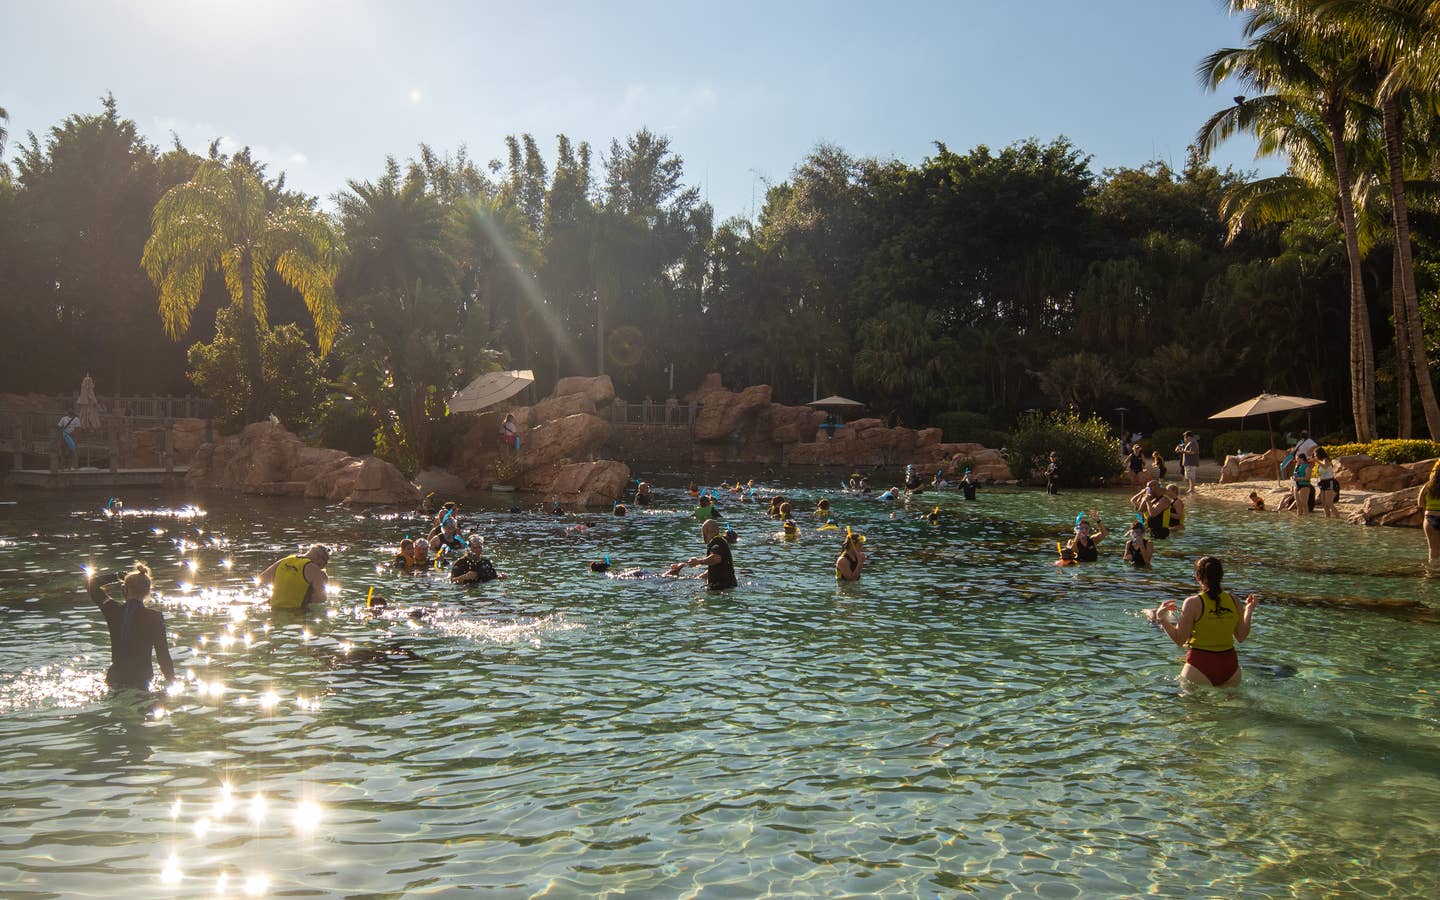 The sun shines on an outdoor water area containing tens of guests in swimwear and lifejackets.